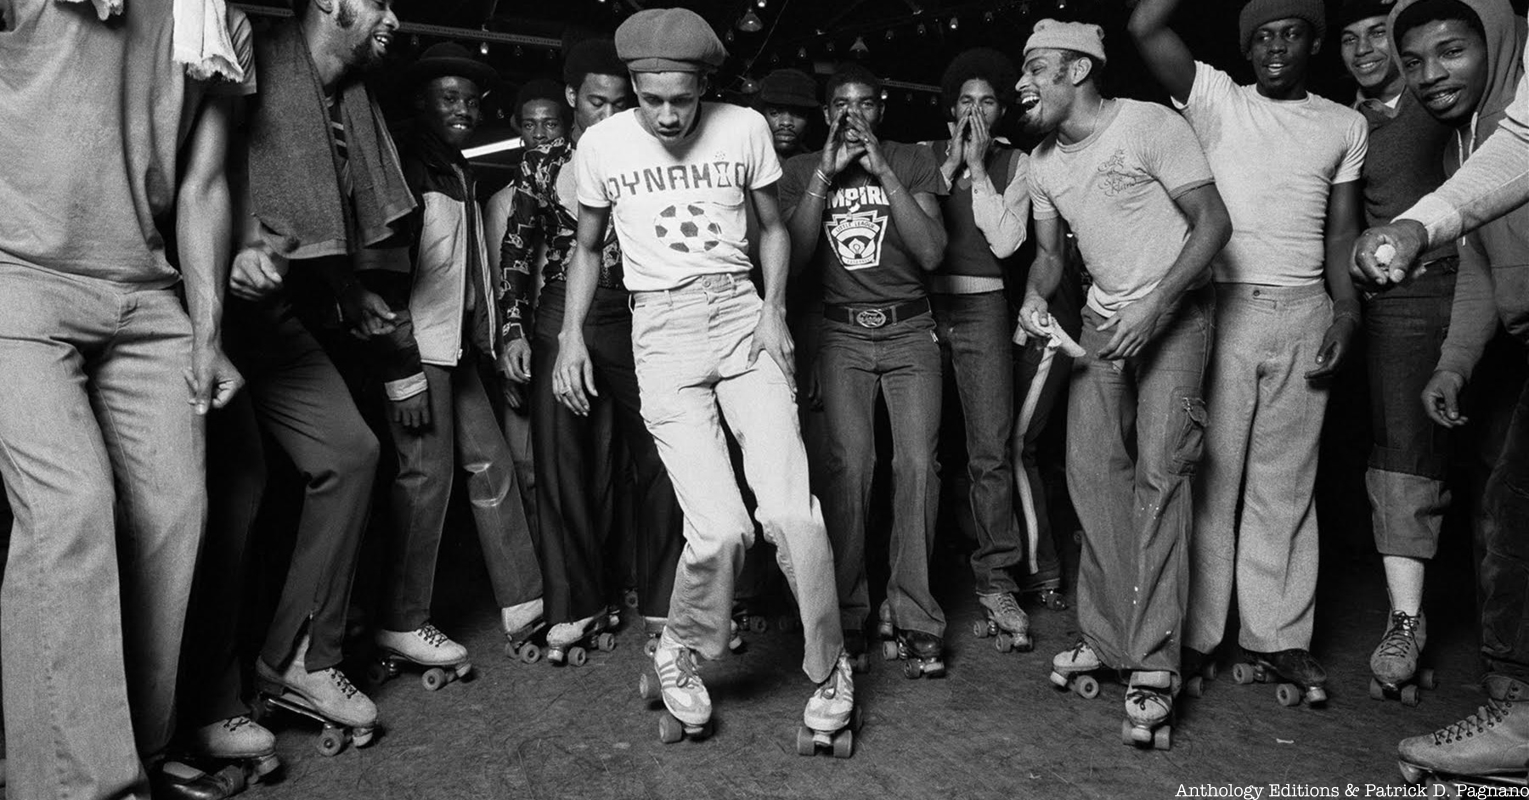 Skaters at Empire Roller Rink in the 1970s, black and white photo